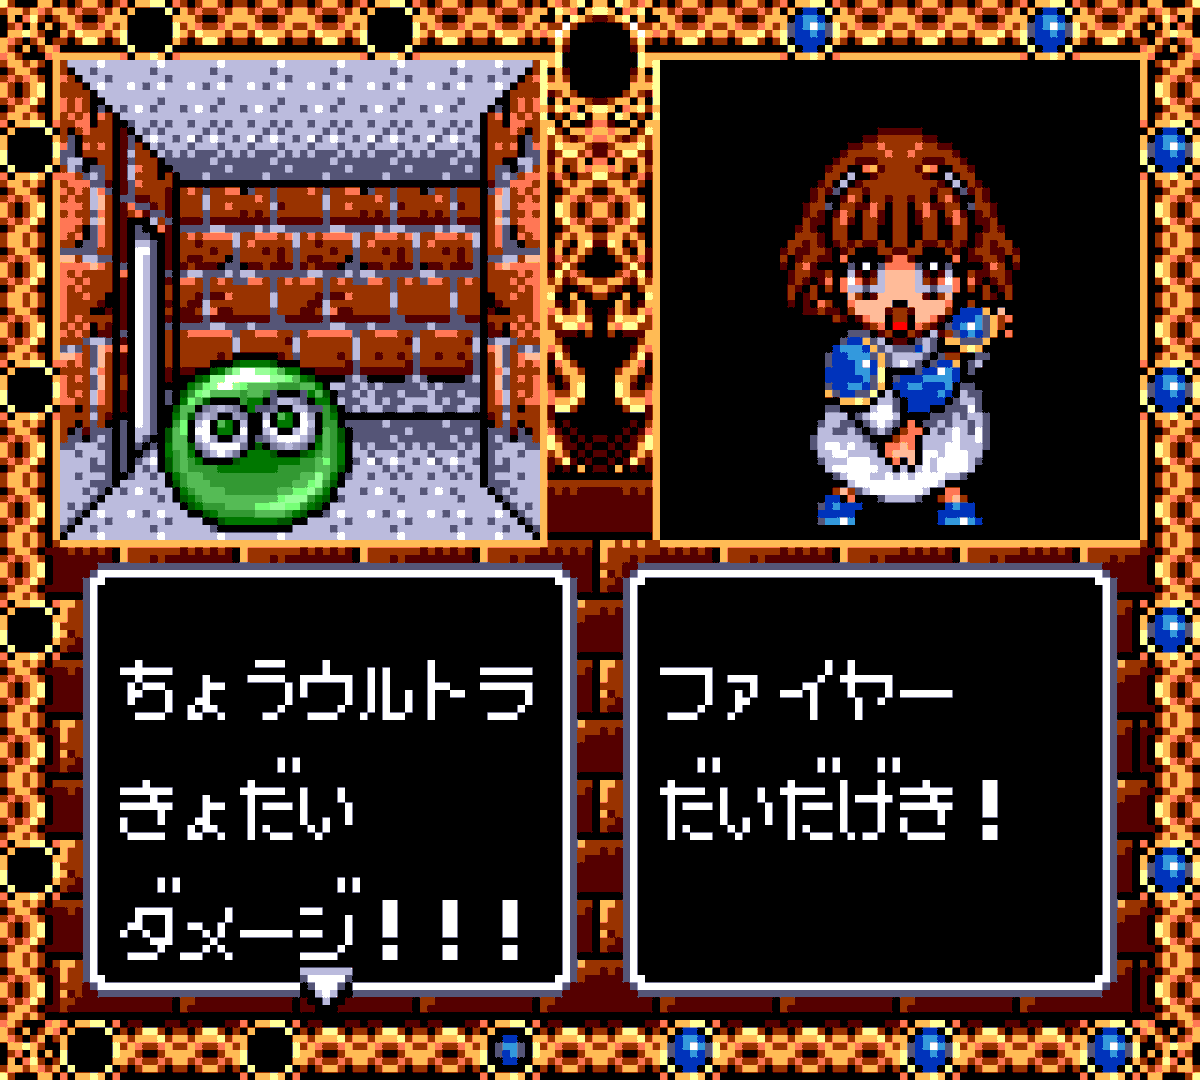 Madou Monogatari has been a surprisingly enjoyable experience so far! Nice music, interesting battle banter, and cute art :D Playing a dungeon crawler with no numbers is a neat mechanic of "just how genki are you?"Crit hit: "Super, ultra, mega damage!"